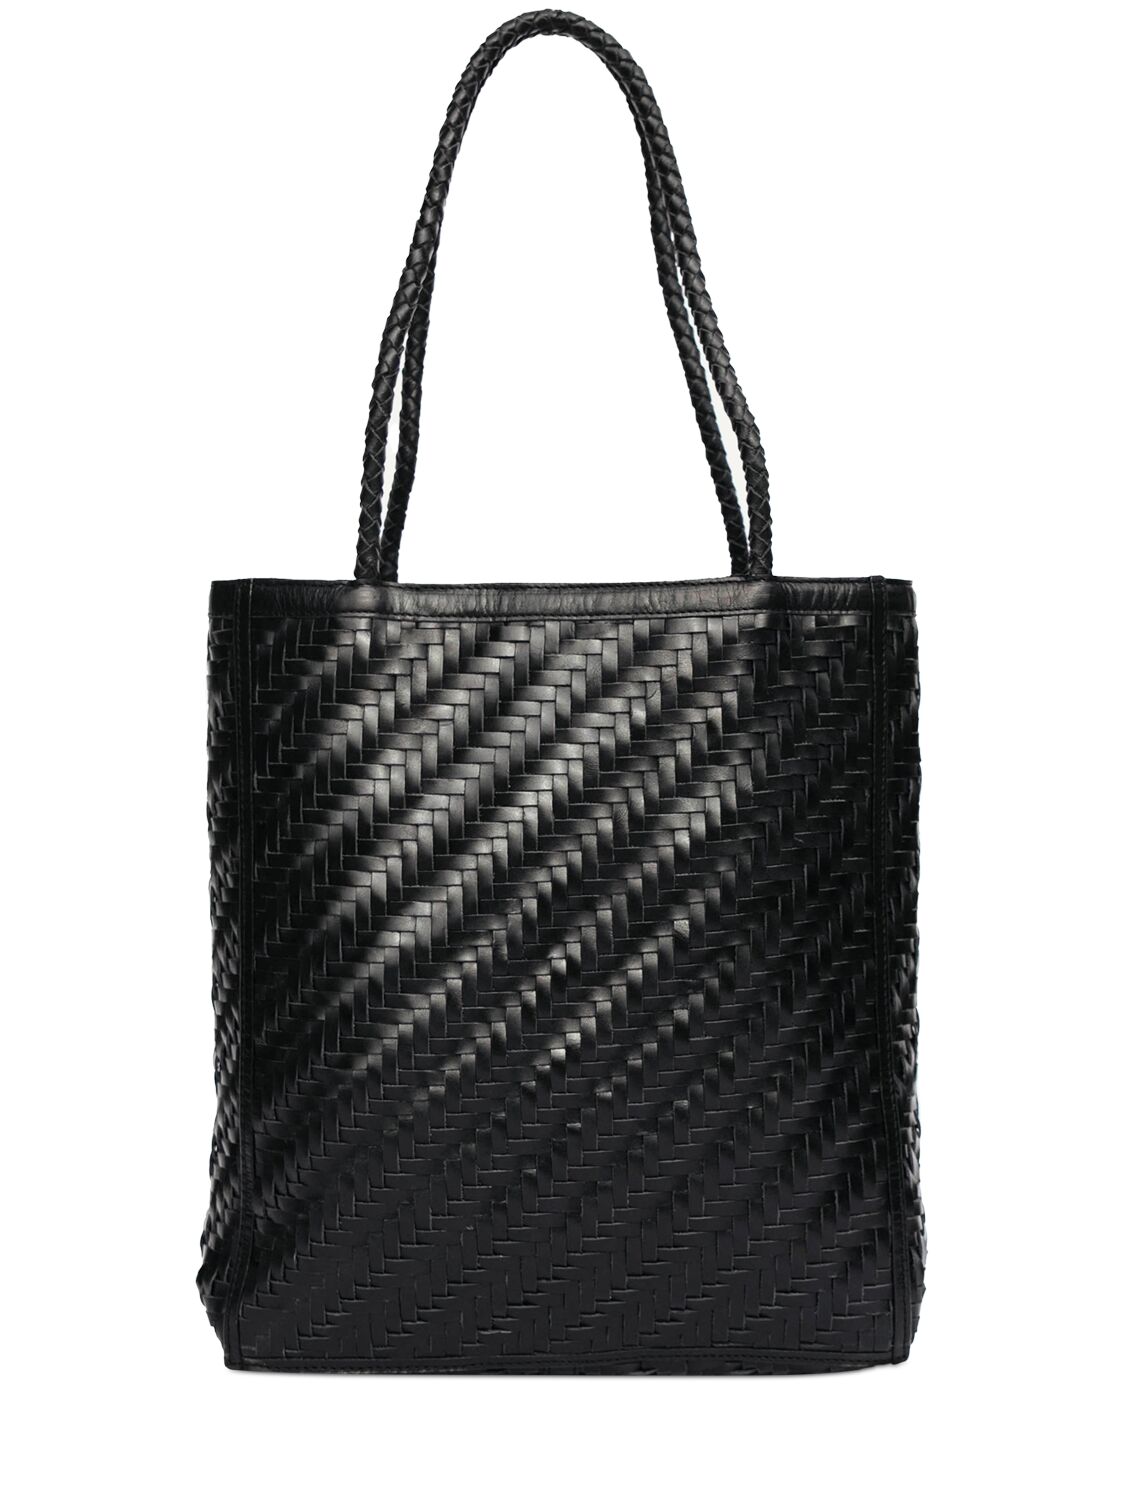 Bembien Le Tote Leather Bag In Black